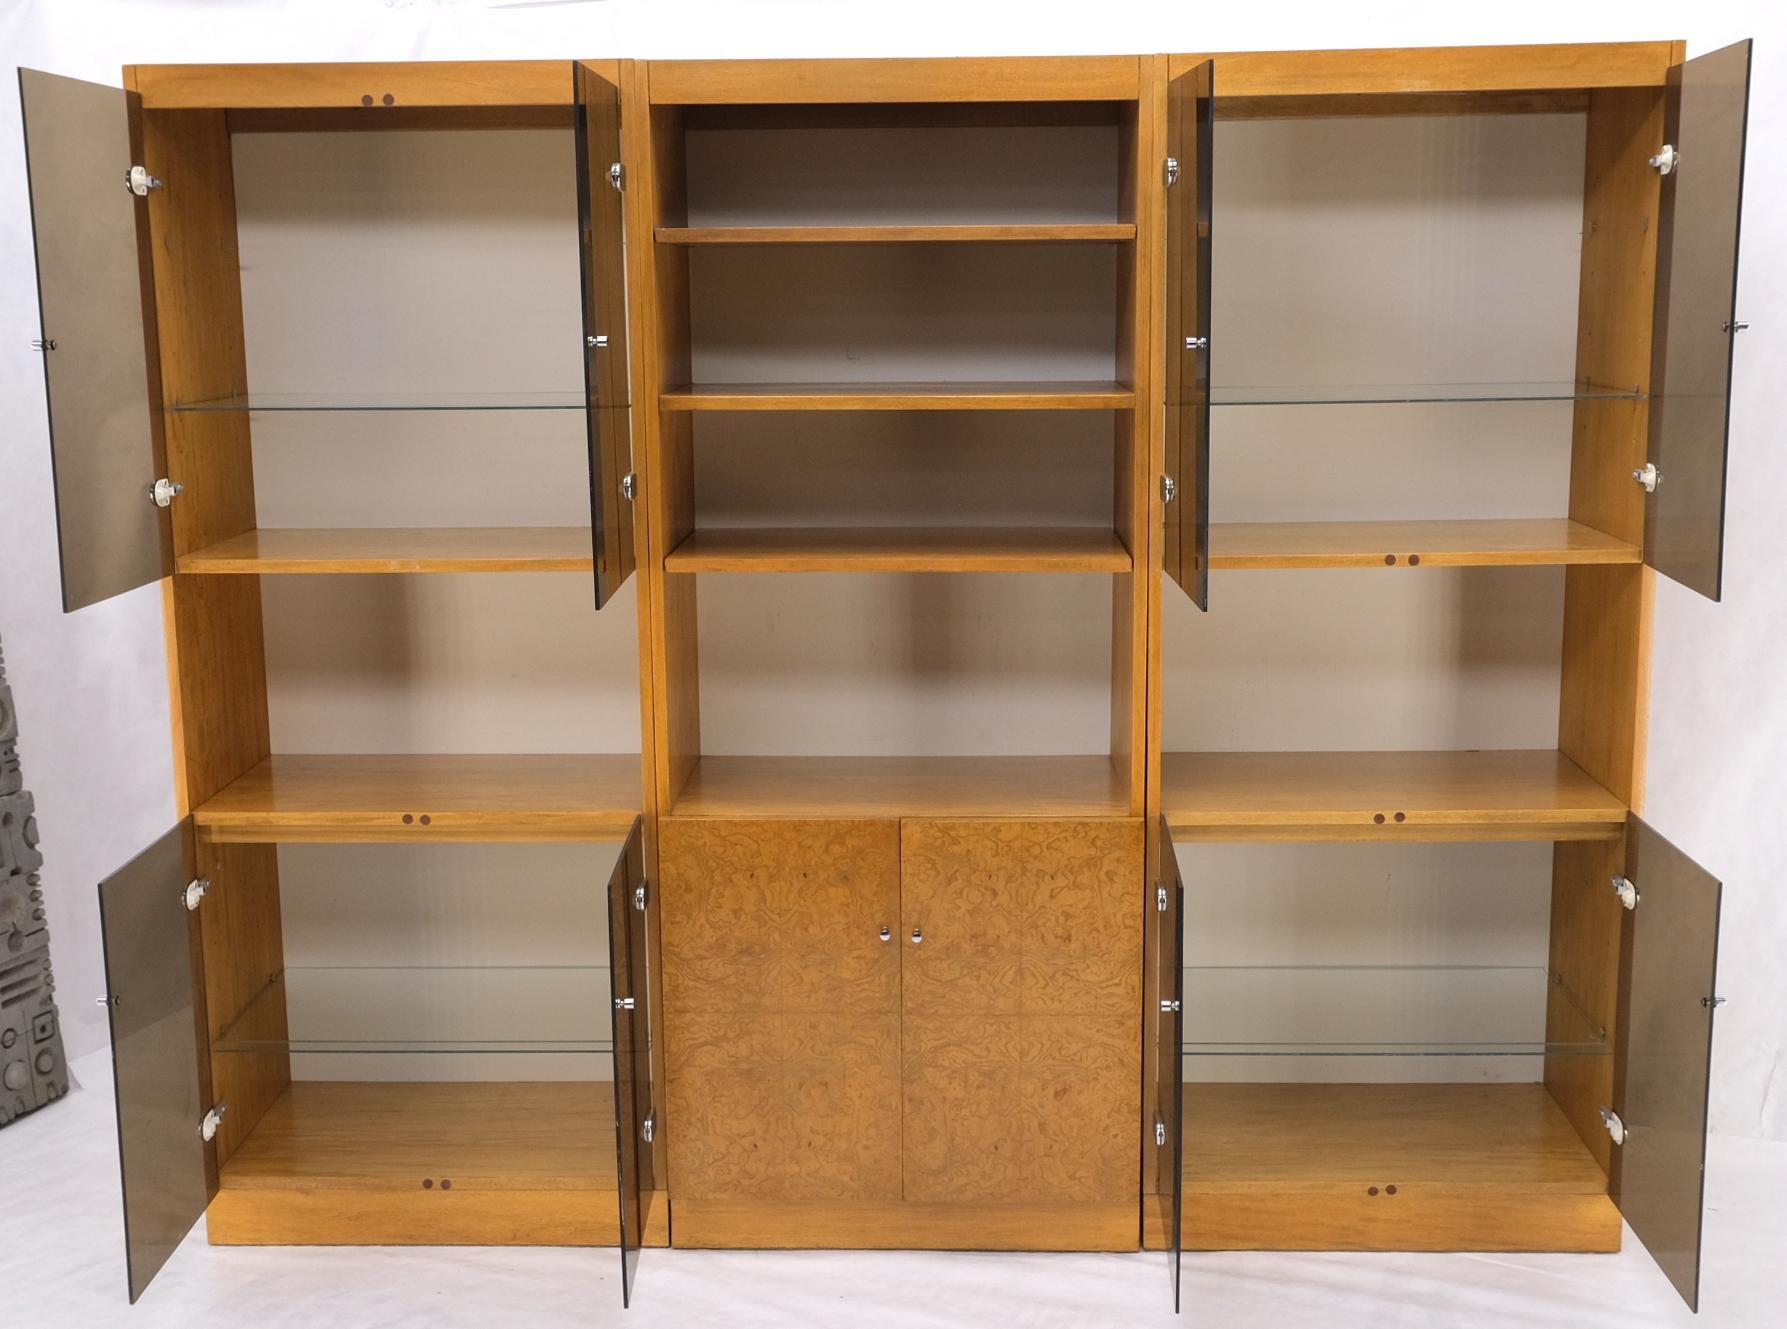 3 Bay Burl Walnut Smoked Glass Doors Cabinets Adjustable Shelves Wall Unit Mint For Sale 8